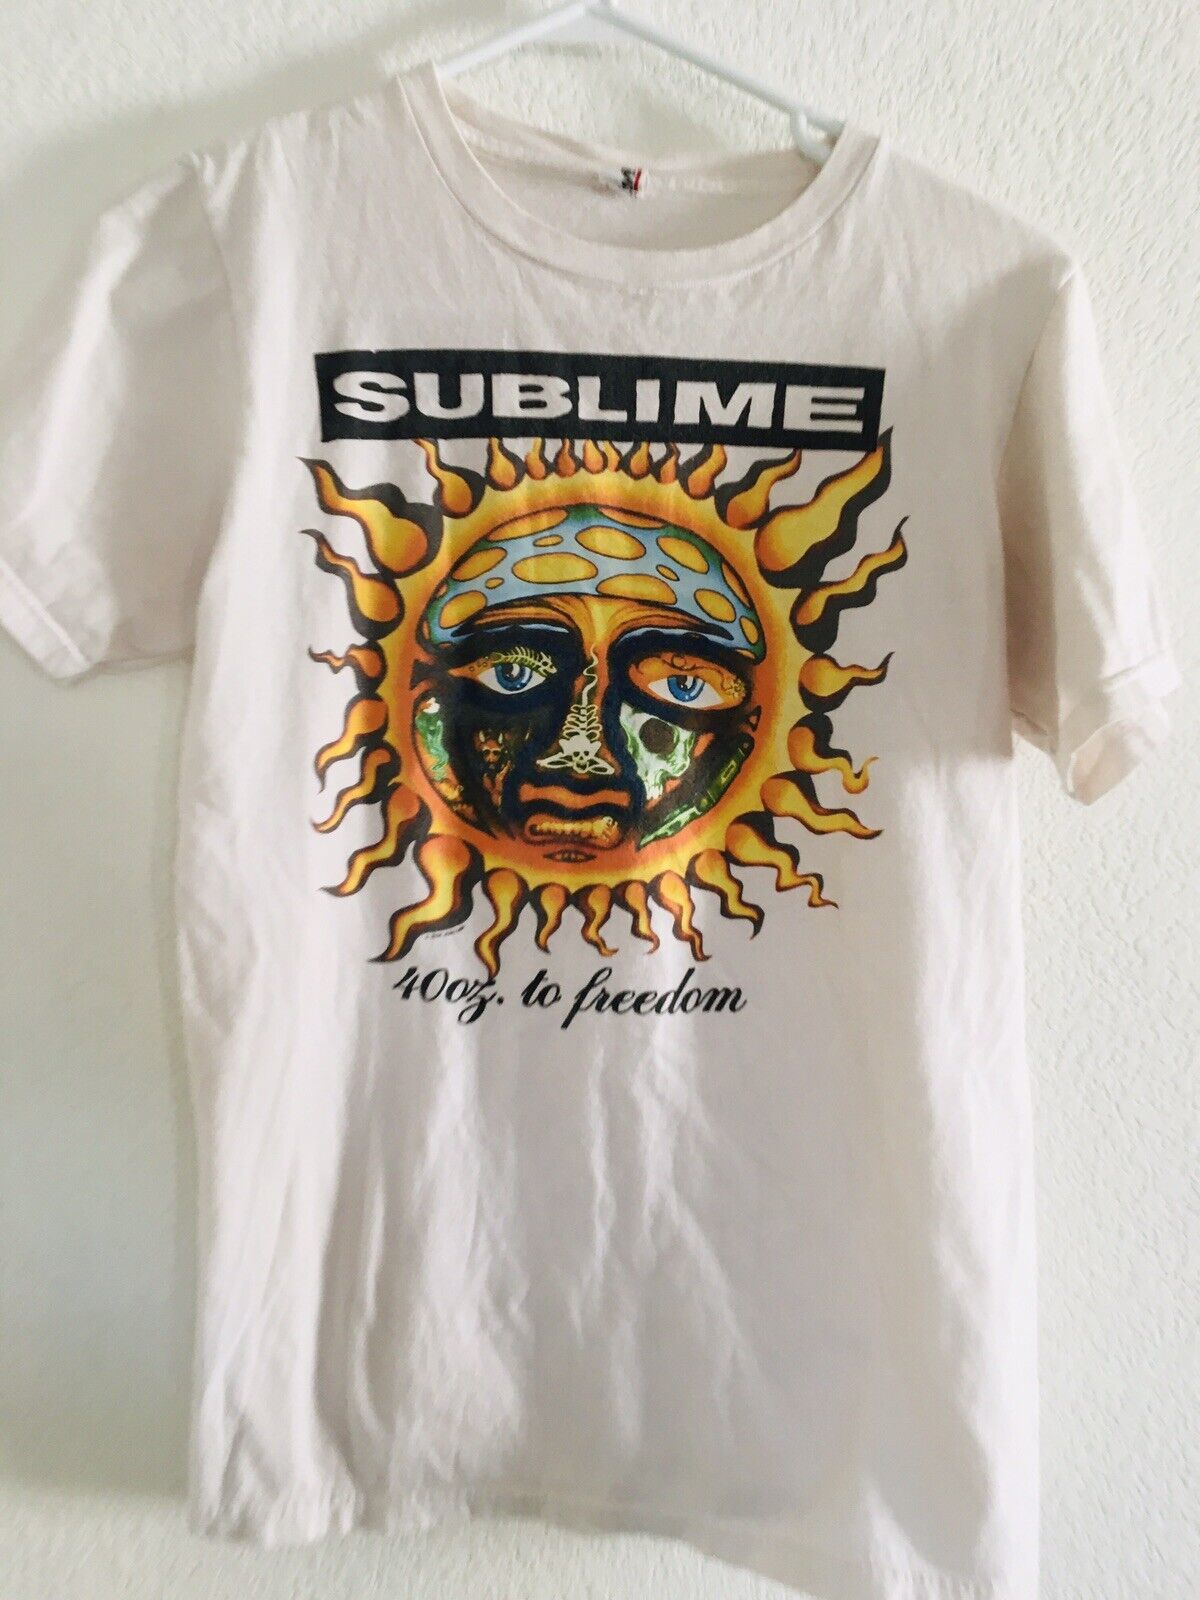 Primary image for Sublime 40 OZ. To Freedom Short Sleeve Tee Shirt Sz Small T-shirt 2006 Anvil Tag